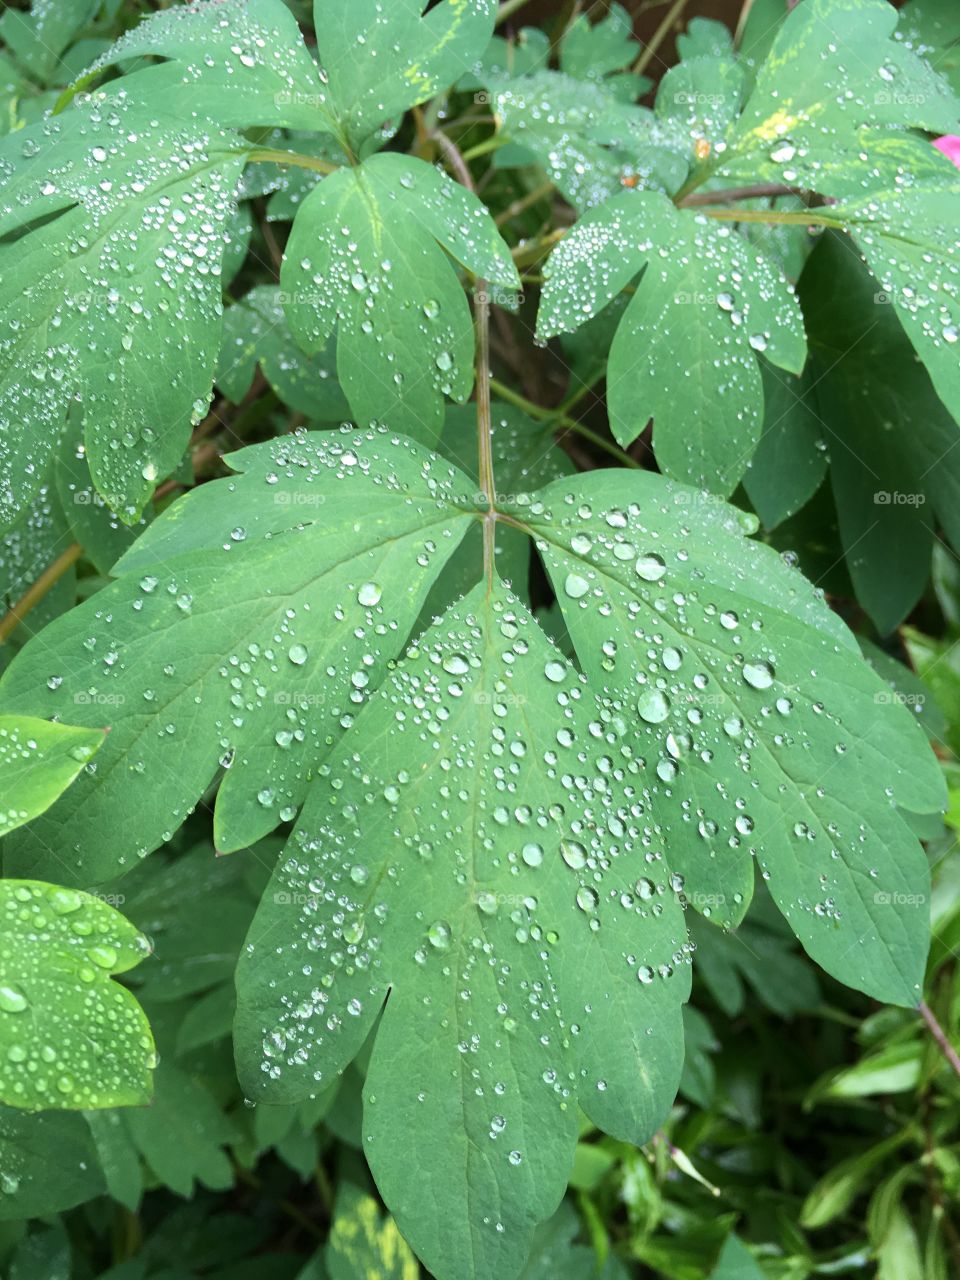 Wet dewdrops on dicentra (bleeding heart) plant leaves in the garden the morning after a damp summer night